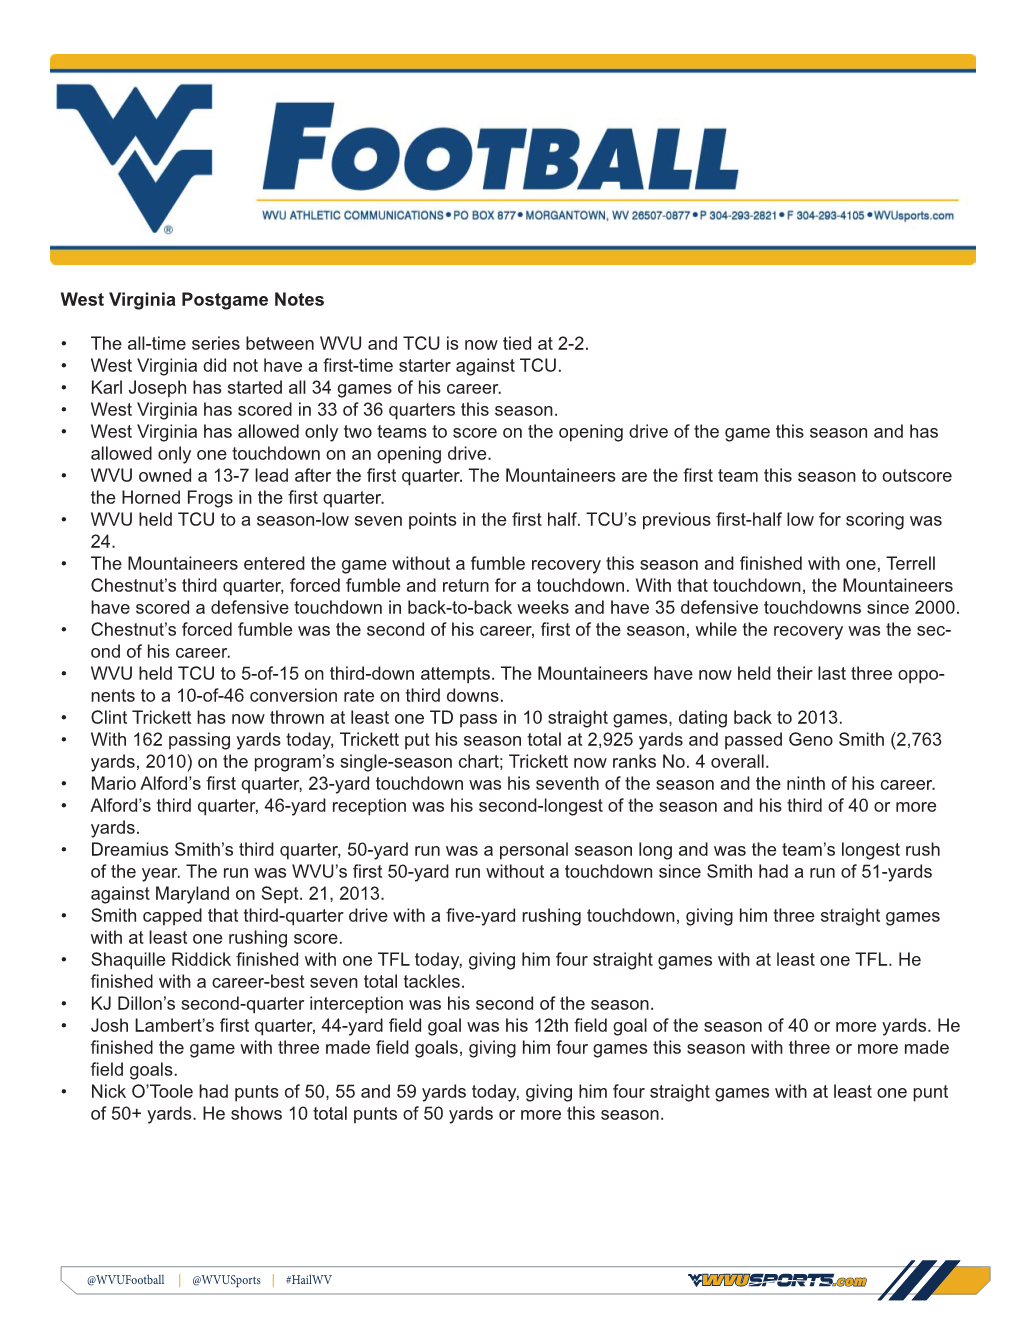 West Virginia Postgame Notes • the All-Time Series Between WVU